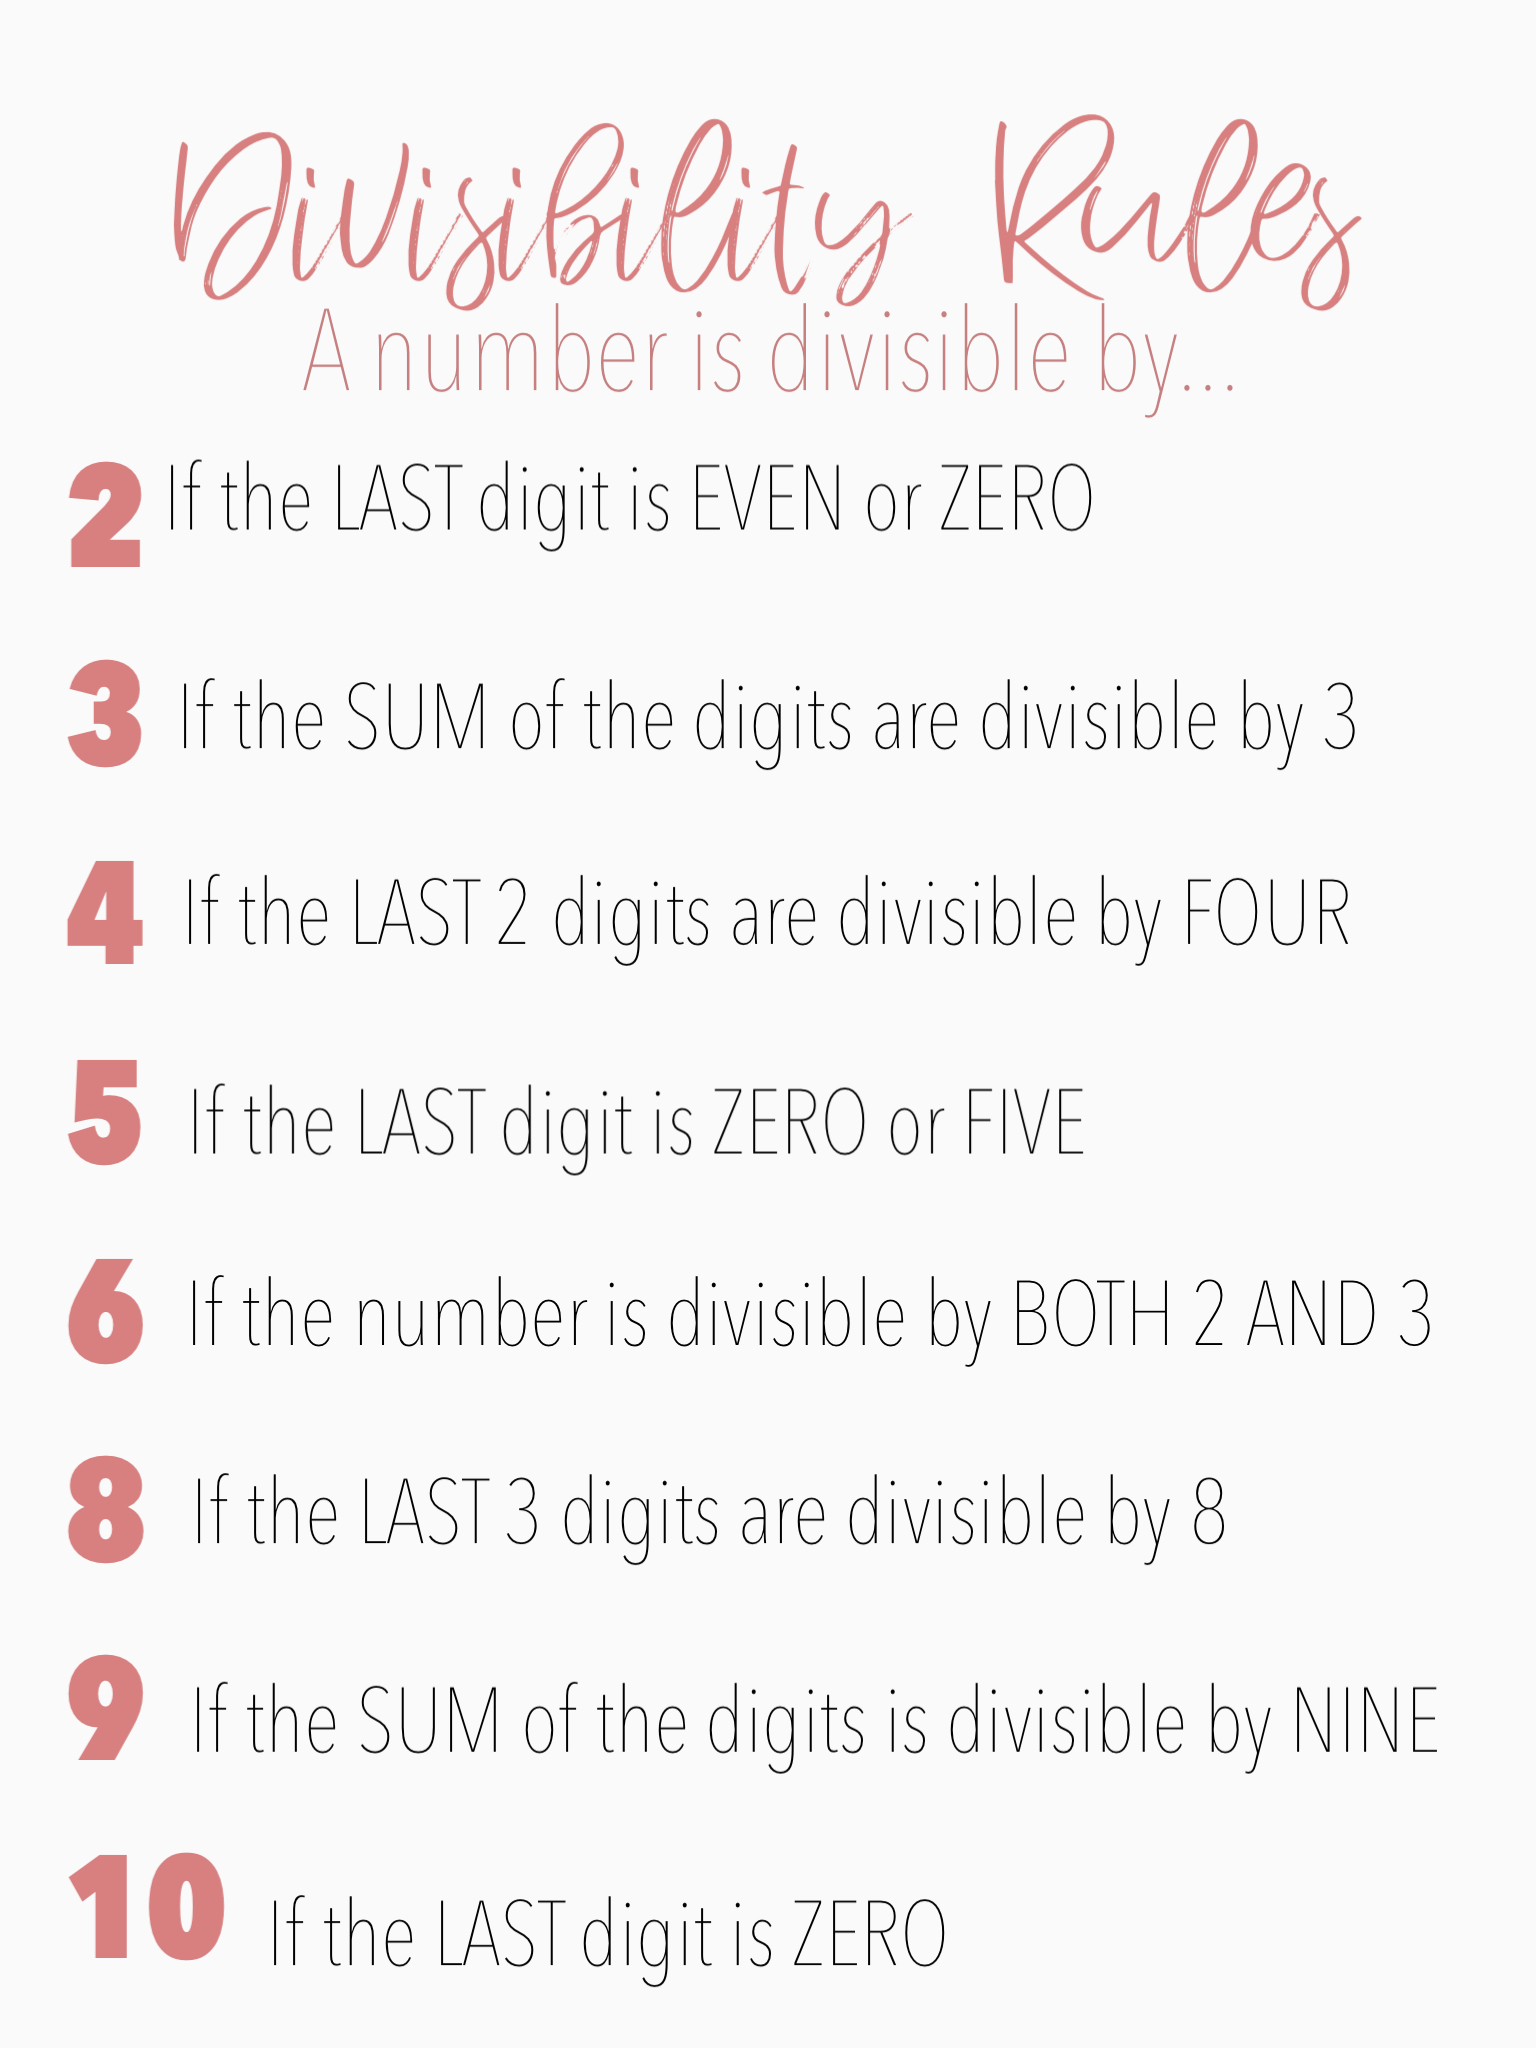 Divisibility Rule's featured image